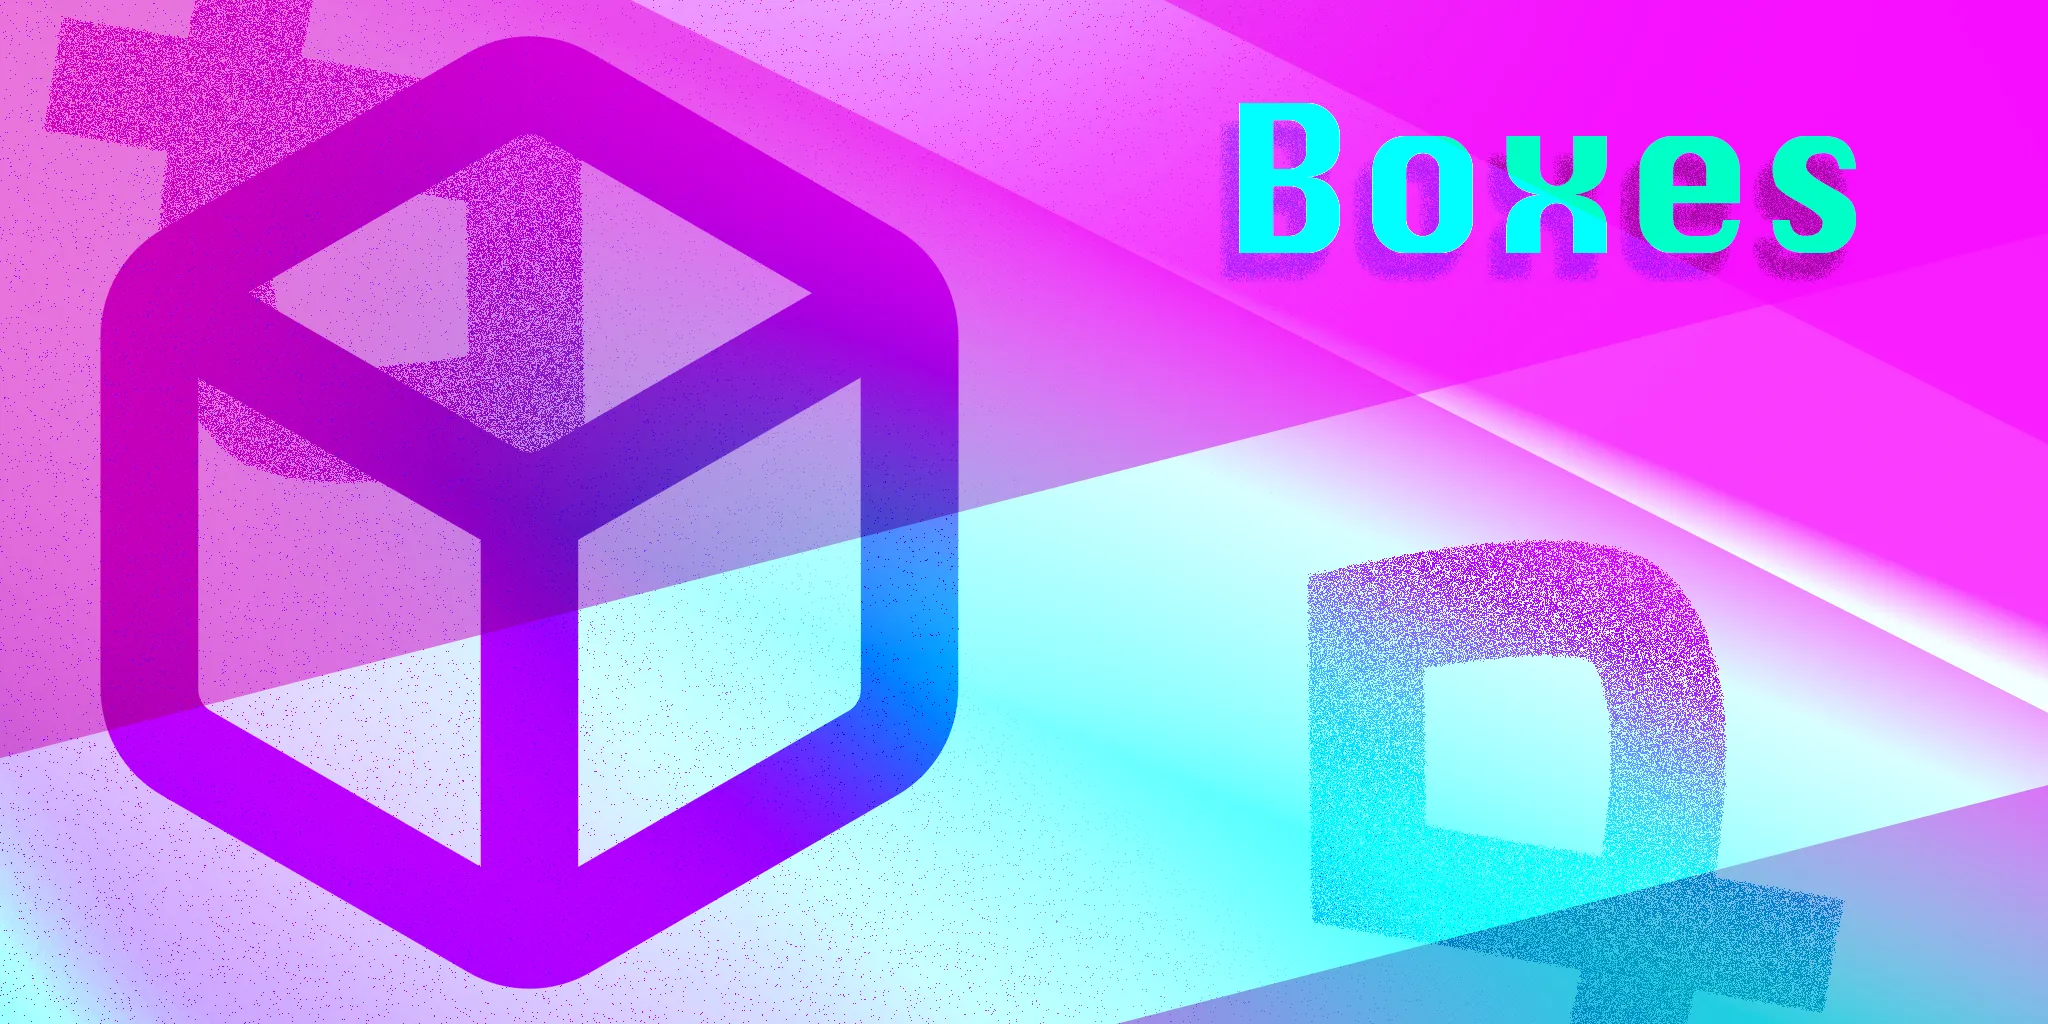 Artwork with a box icon, Yaad logo, and the text 'Boxes' in a postmodern style.